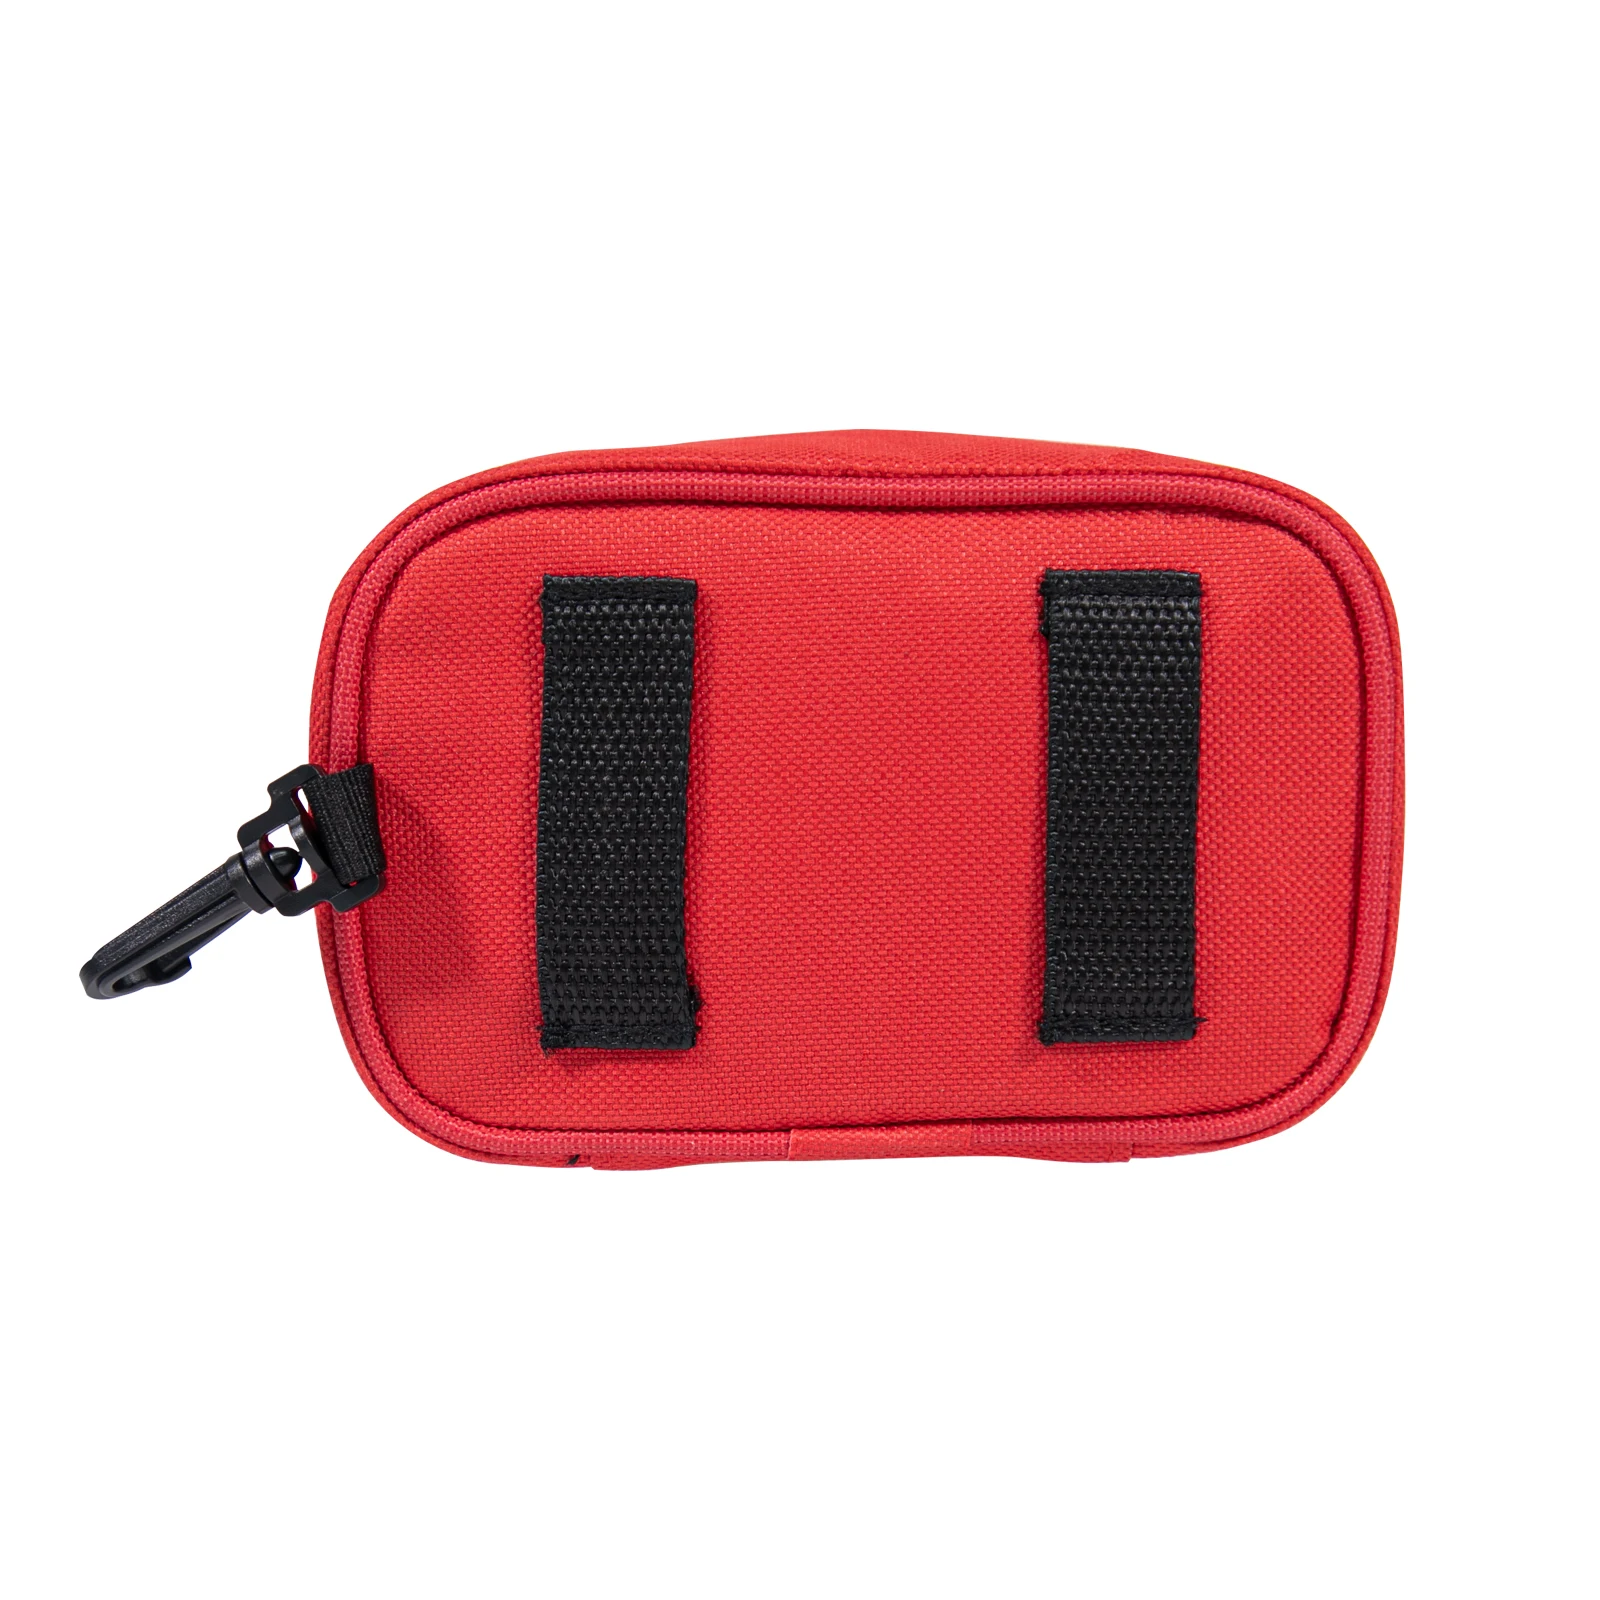 Amazon Hot Sale Customized Compact Pet Medical First Aid Kit for Outdoor Home